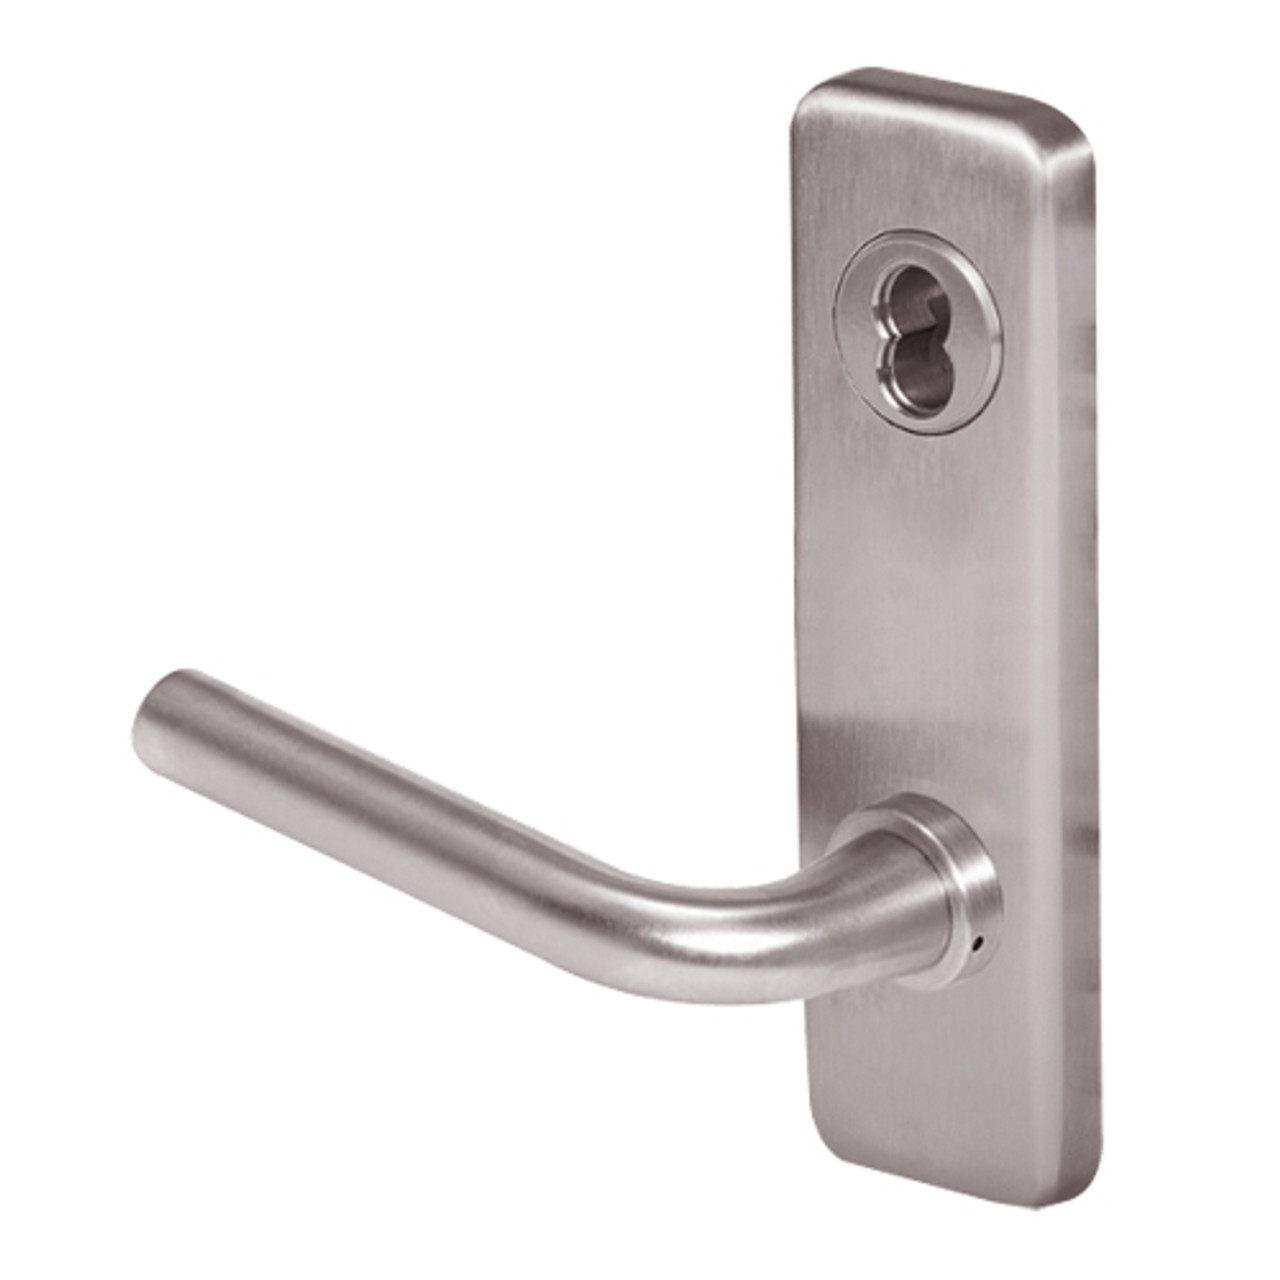 45H0LB12J630 Best 40H Series Privacy with Deadbolt Heavy Duty Mortise Lever Lock with Solid Tube with No Return in Satin Stainless Steel